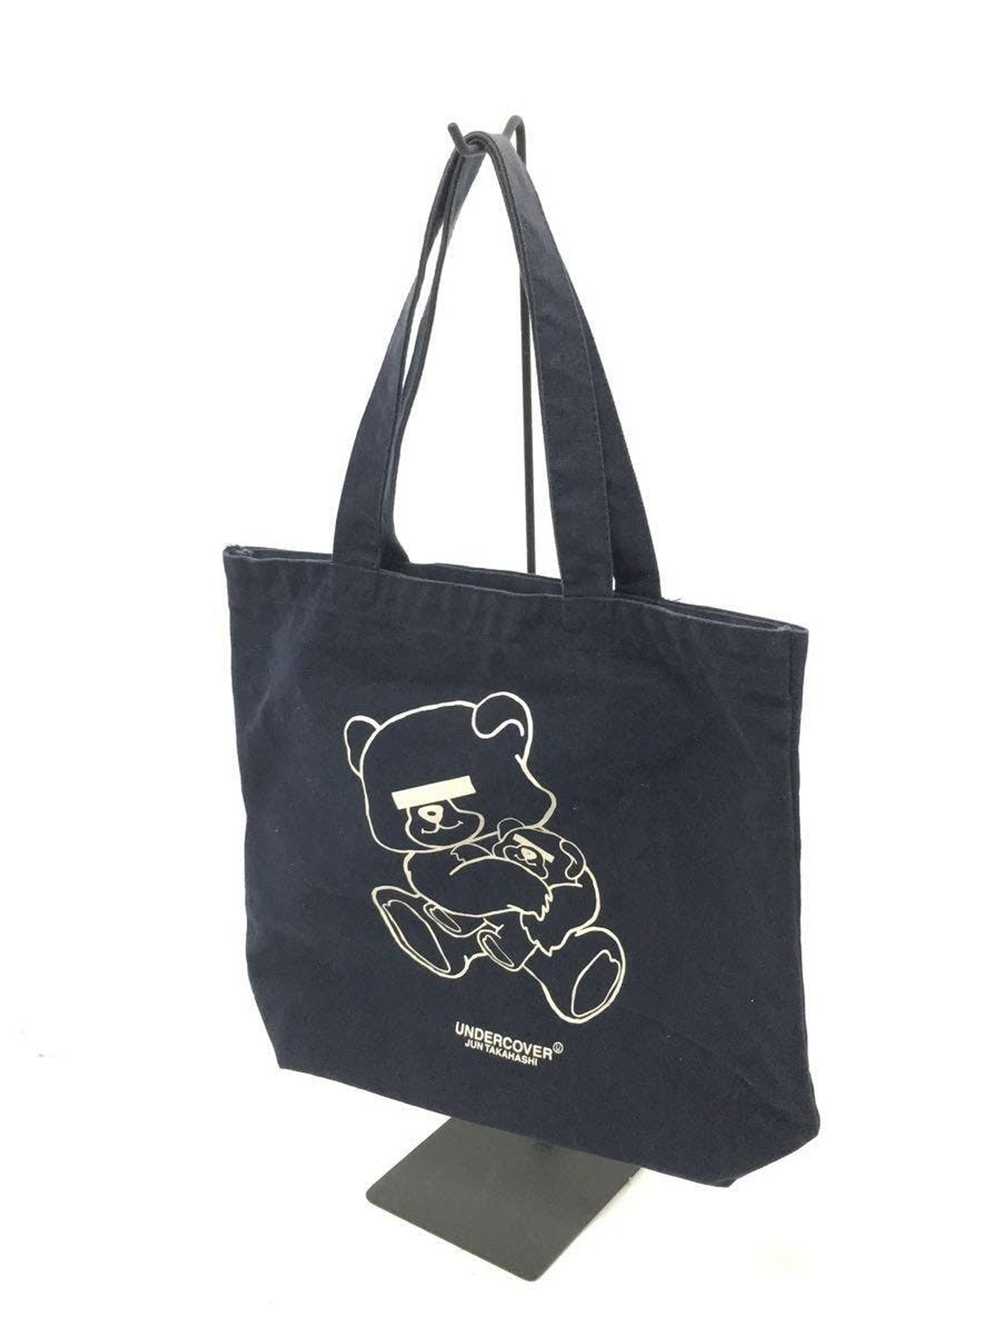 Undercover Blindfold Bear Canvas Tote Bag - image 2